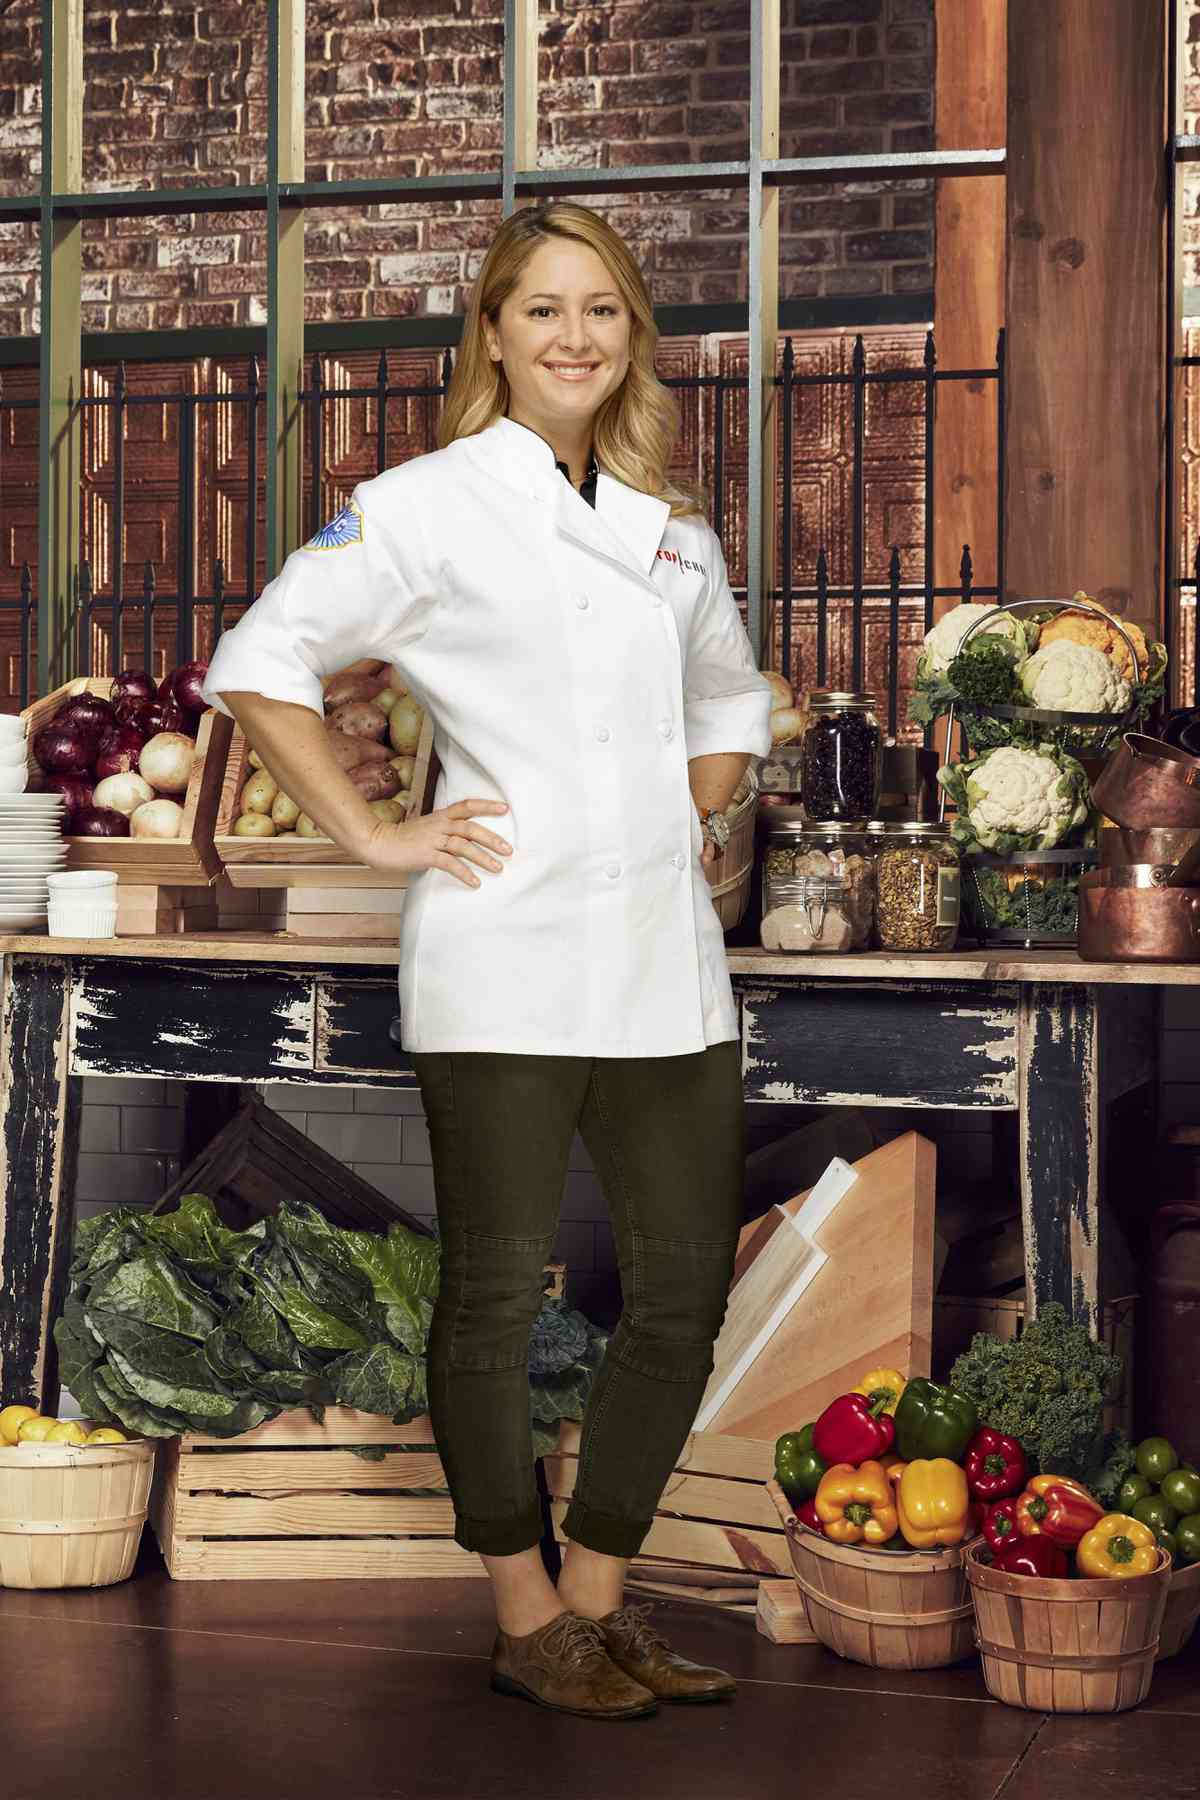 Top Chef Winner Brooke Williamson Says She 'Executed a Really Flawless' Finale Meal